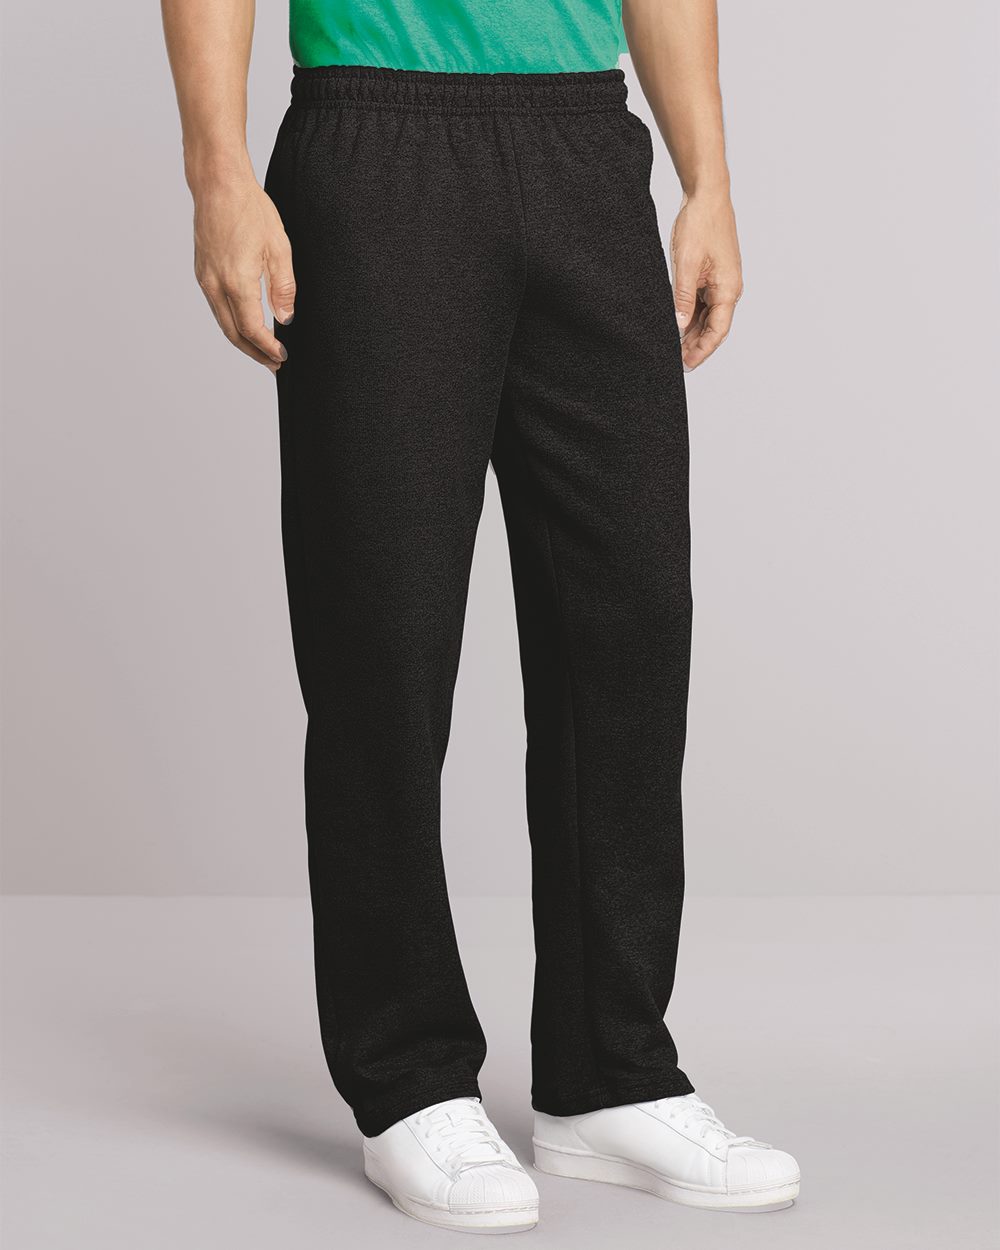 Adult Heavy Blend™ Adult 8 oz. Open-Bottom Sweatpants with Pockets 5XL RED